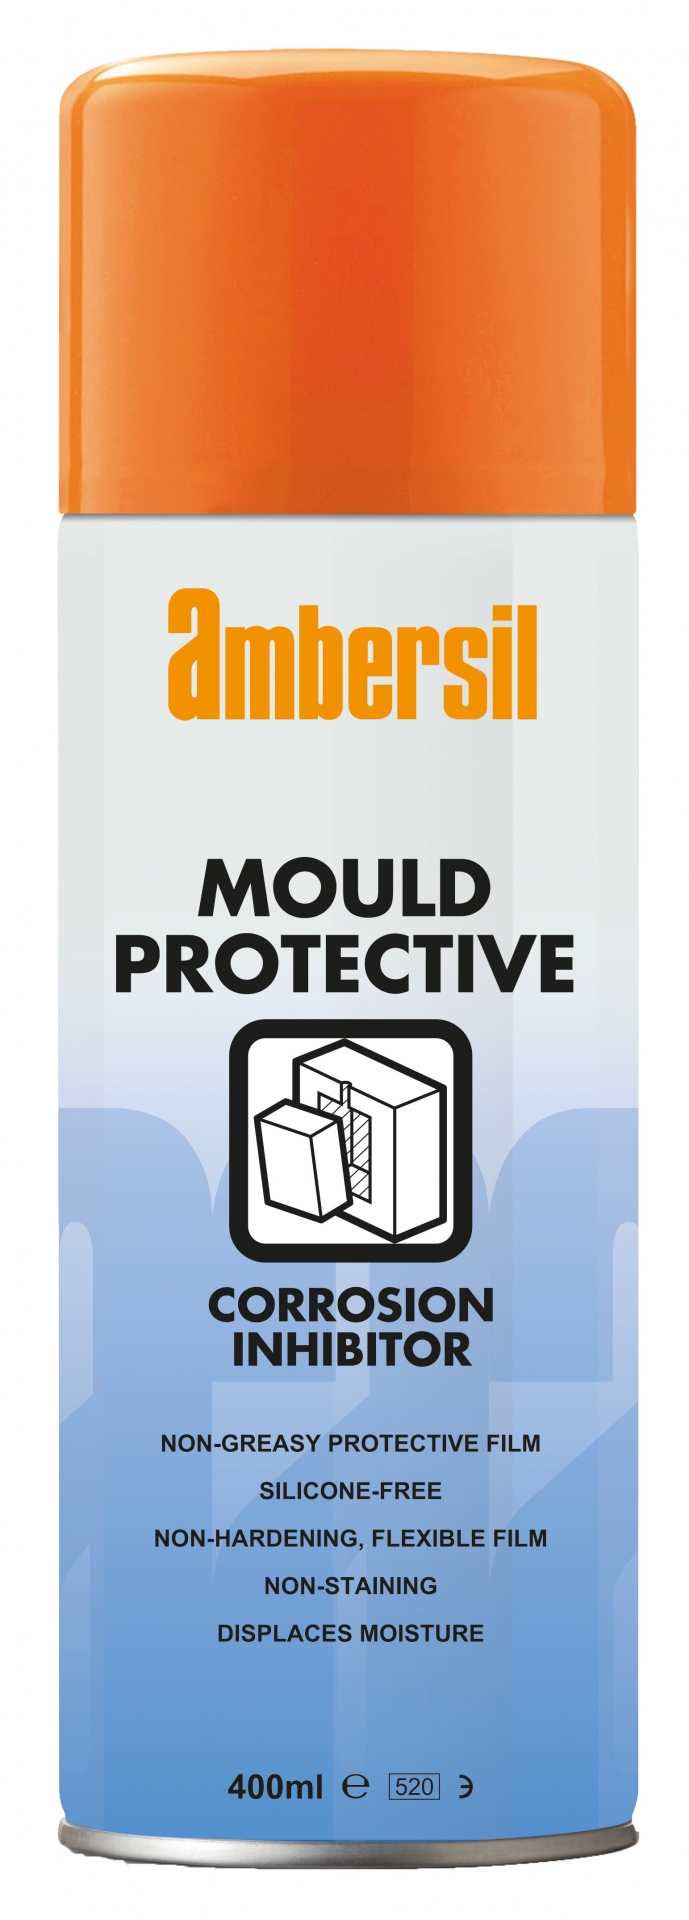 MOULD PROTECTIVE